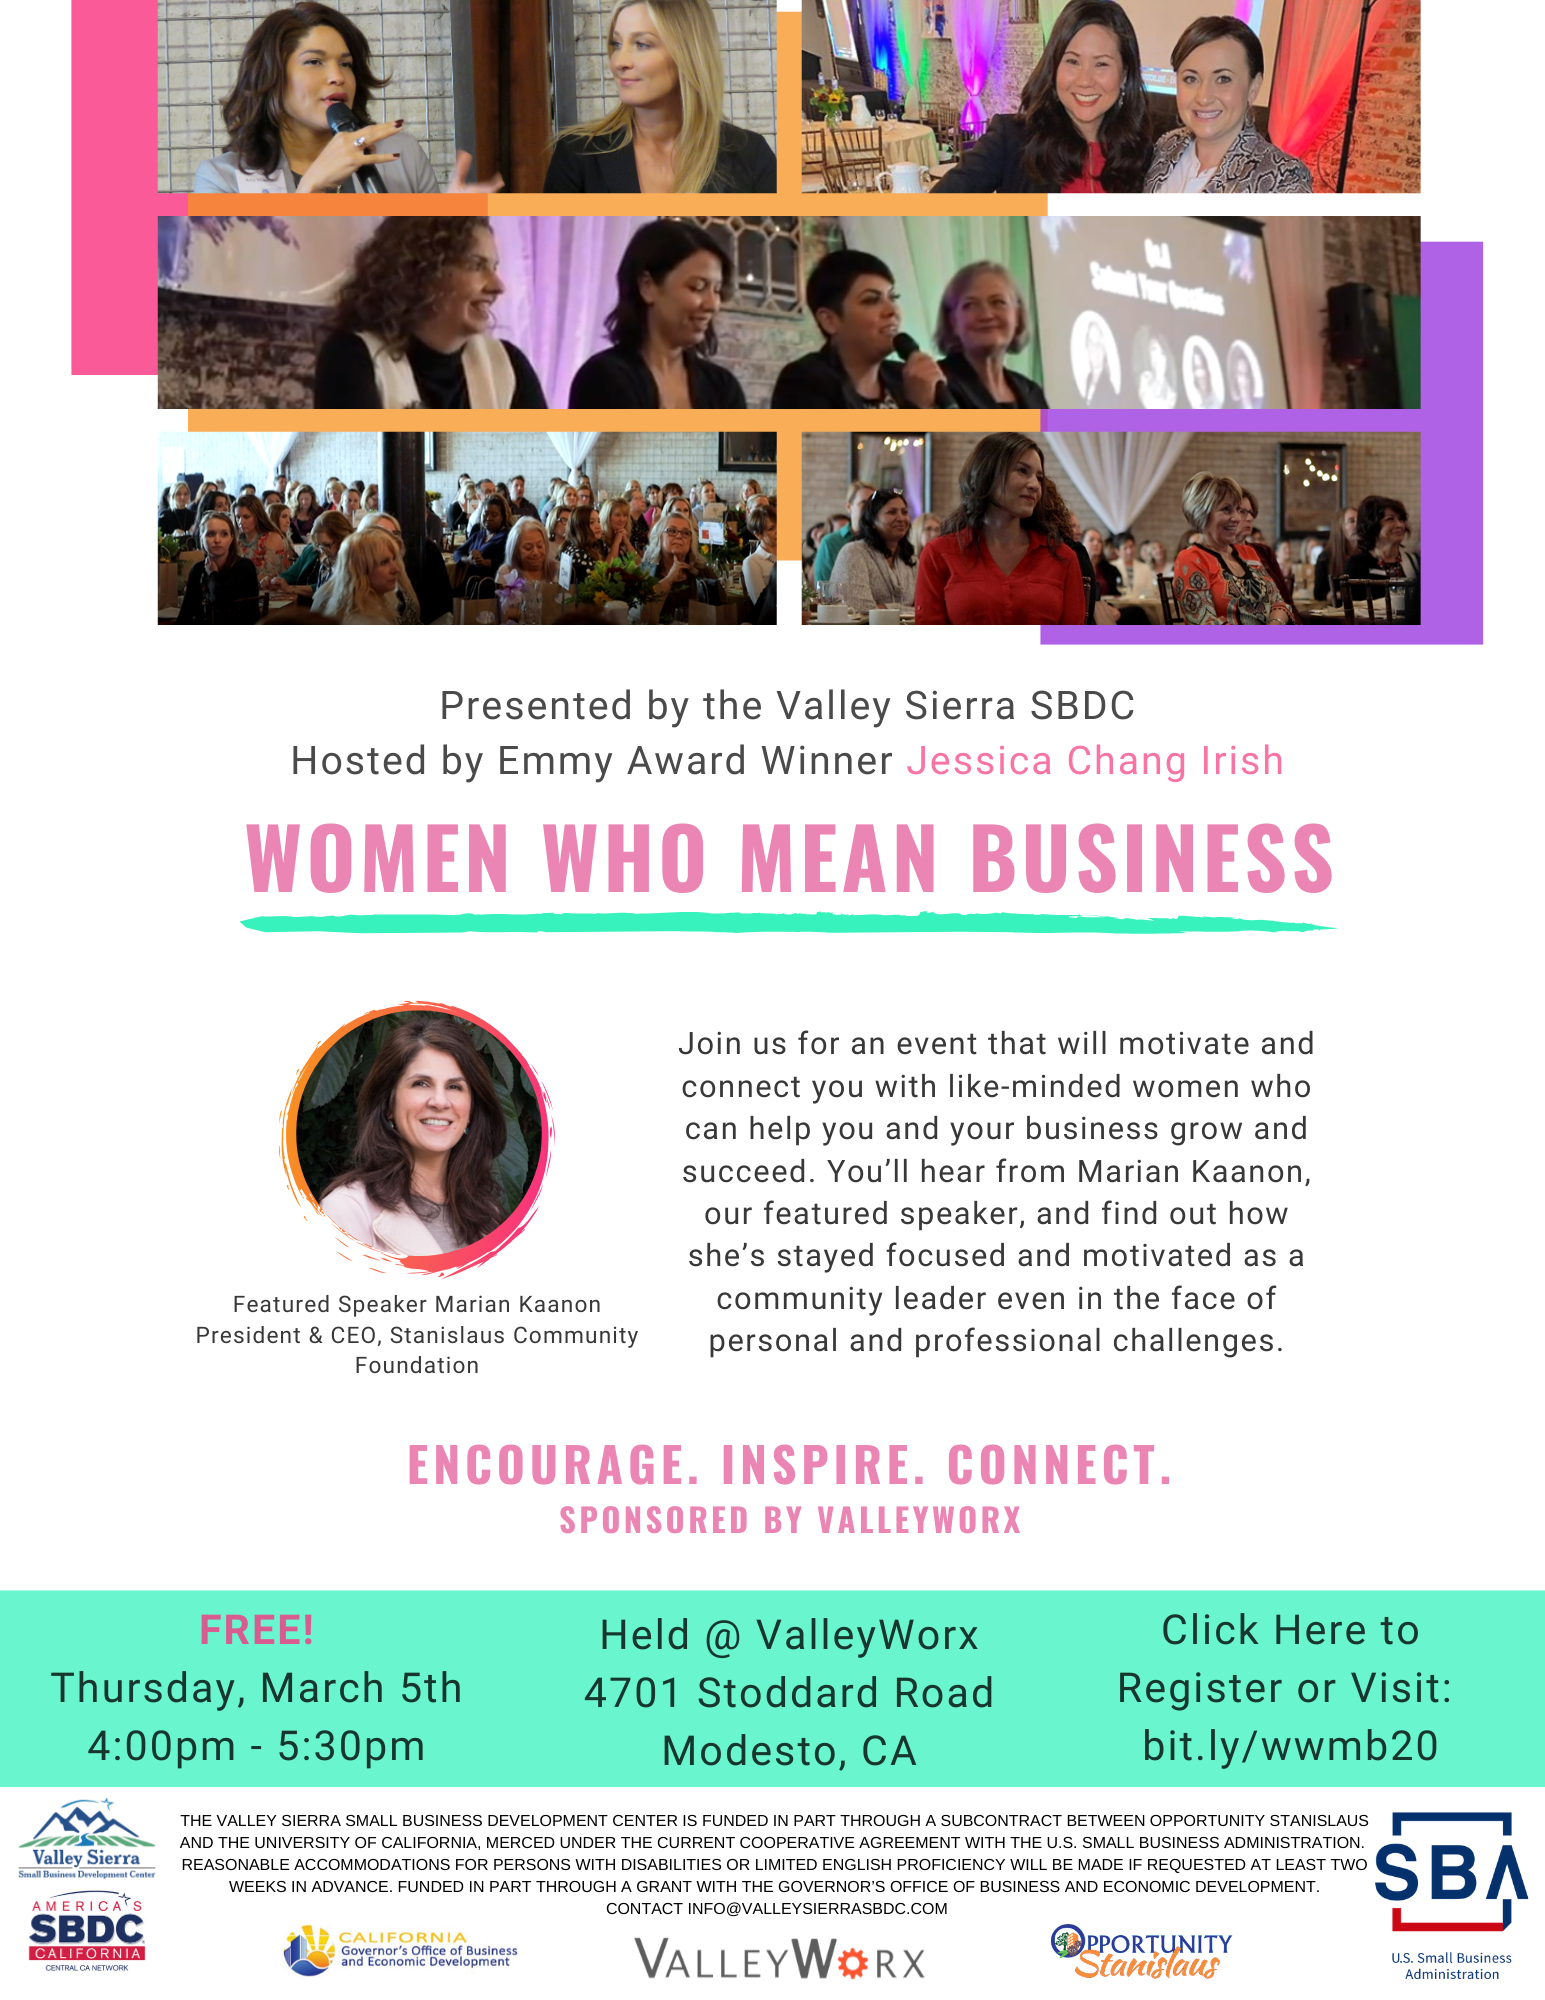 Event Flyer, Women Who Mean Business. 3/5/2020, 4:00pm-5:30pm. FREE. At ValleyWorx 4701 Stoddard Road, 2nd floor lobby, Modesto, Ca.